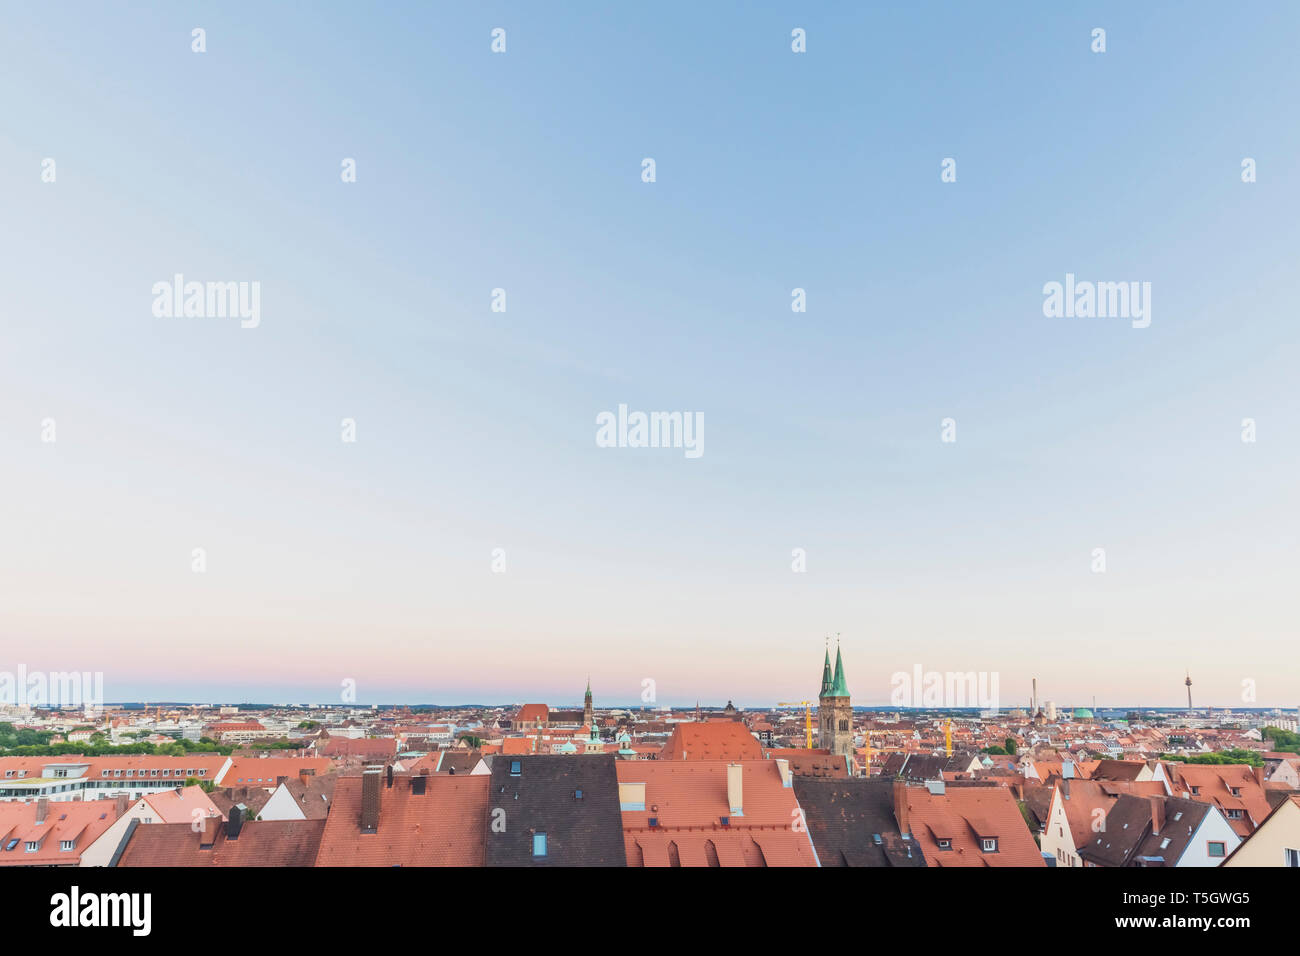 Germany, Nuremberg, Old town, cityscape in the evening light Stock Photo